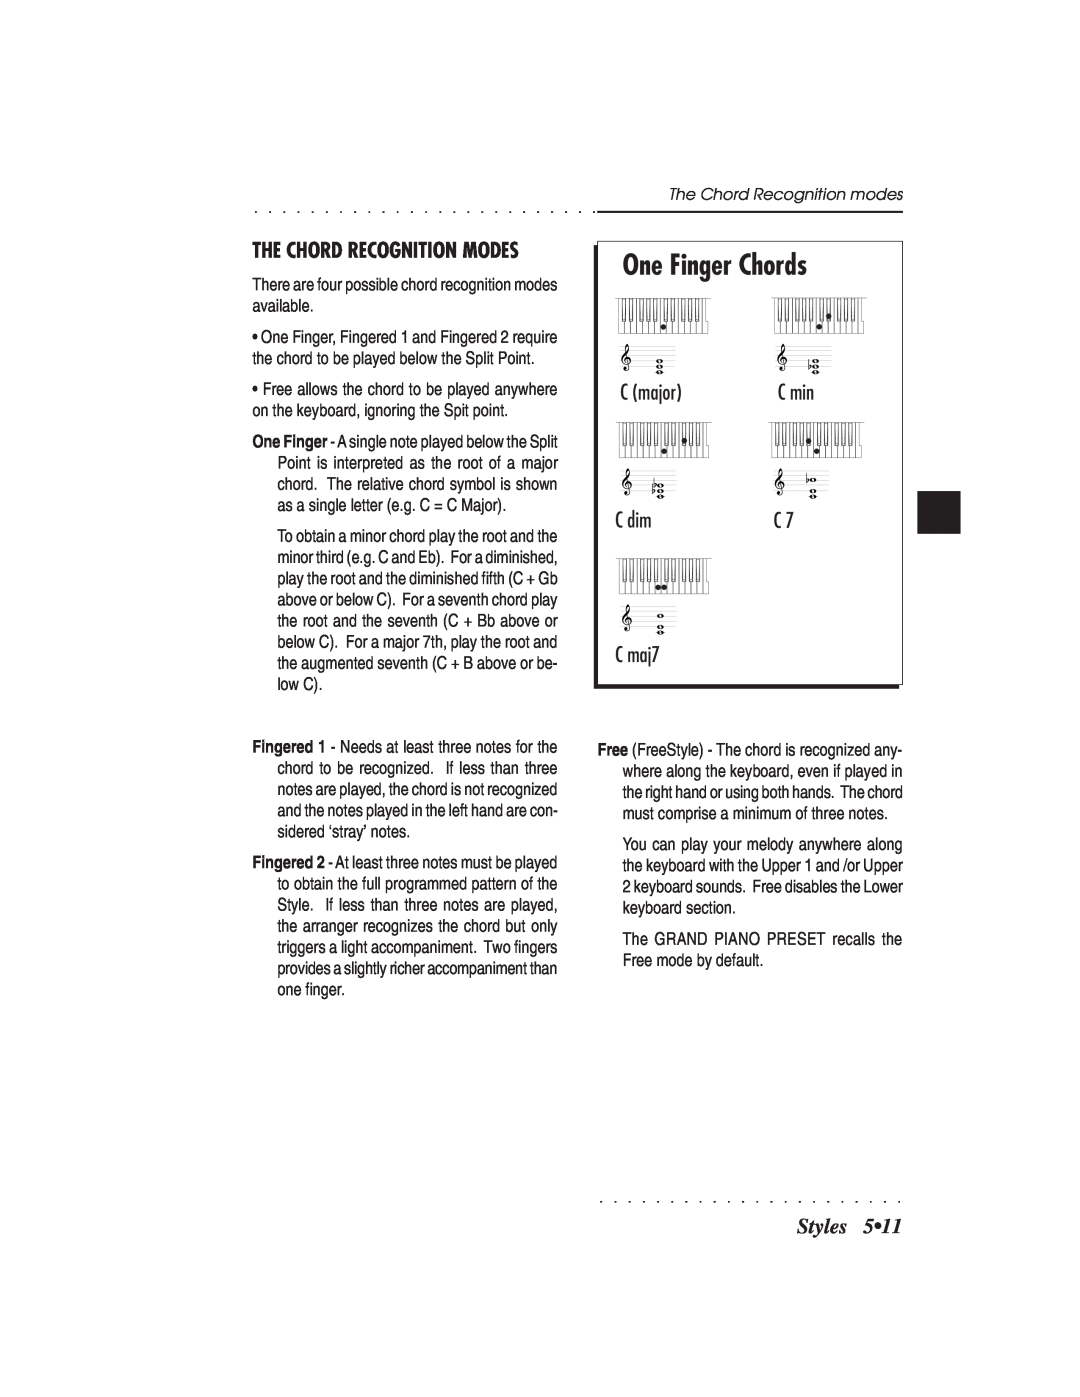 IBM PS1500 owner manual One Finger Chords, C major, C dim, C maj7, Styles, The Chord Recognition Modes 